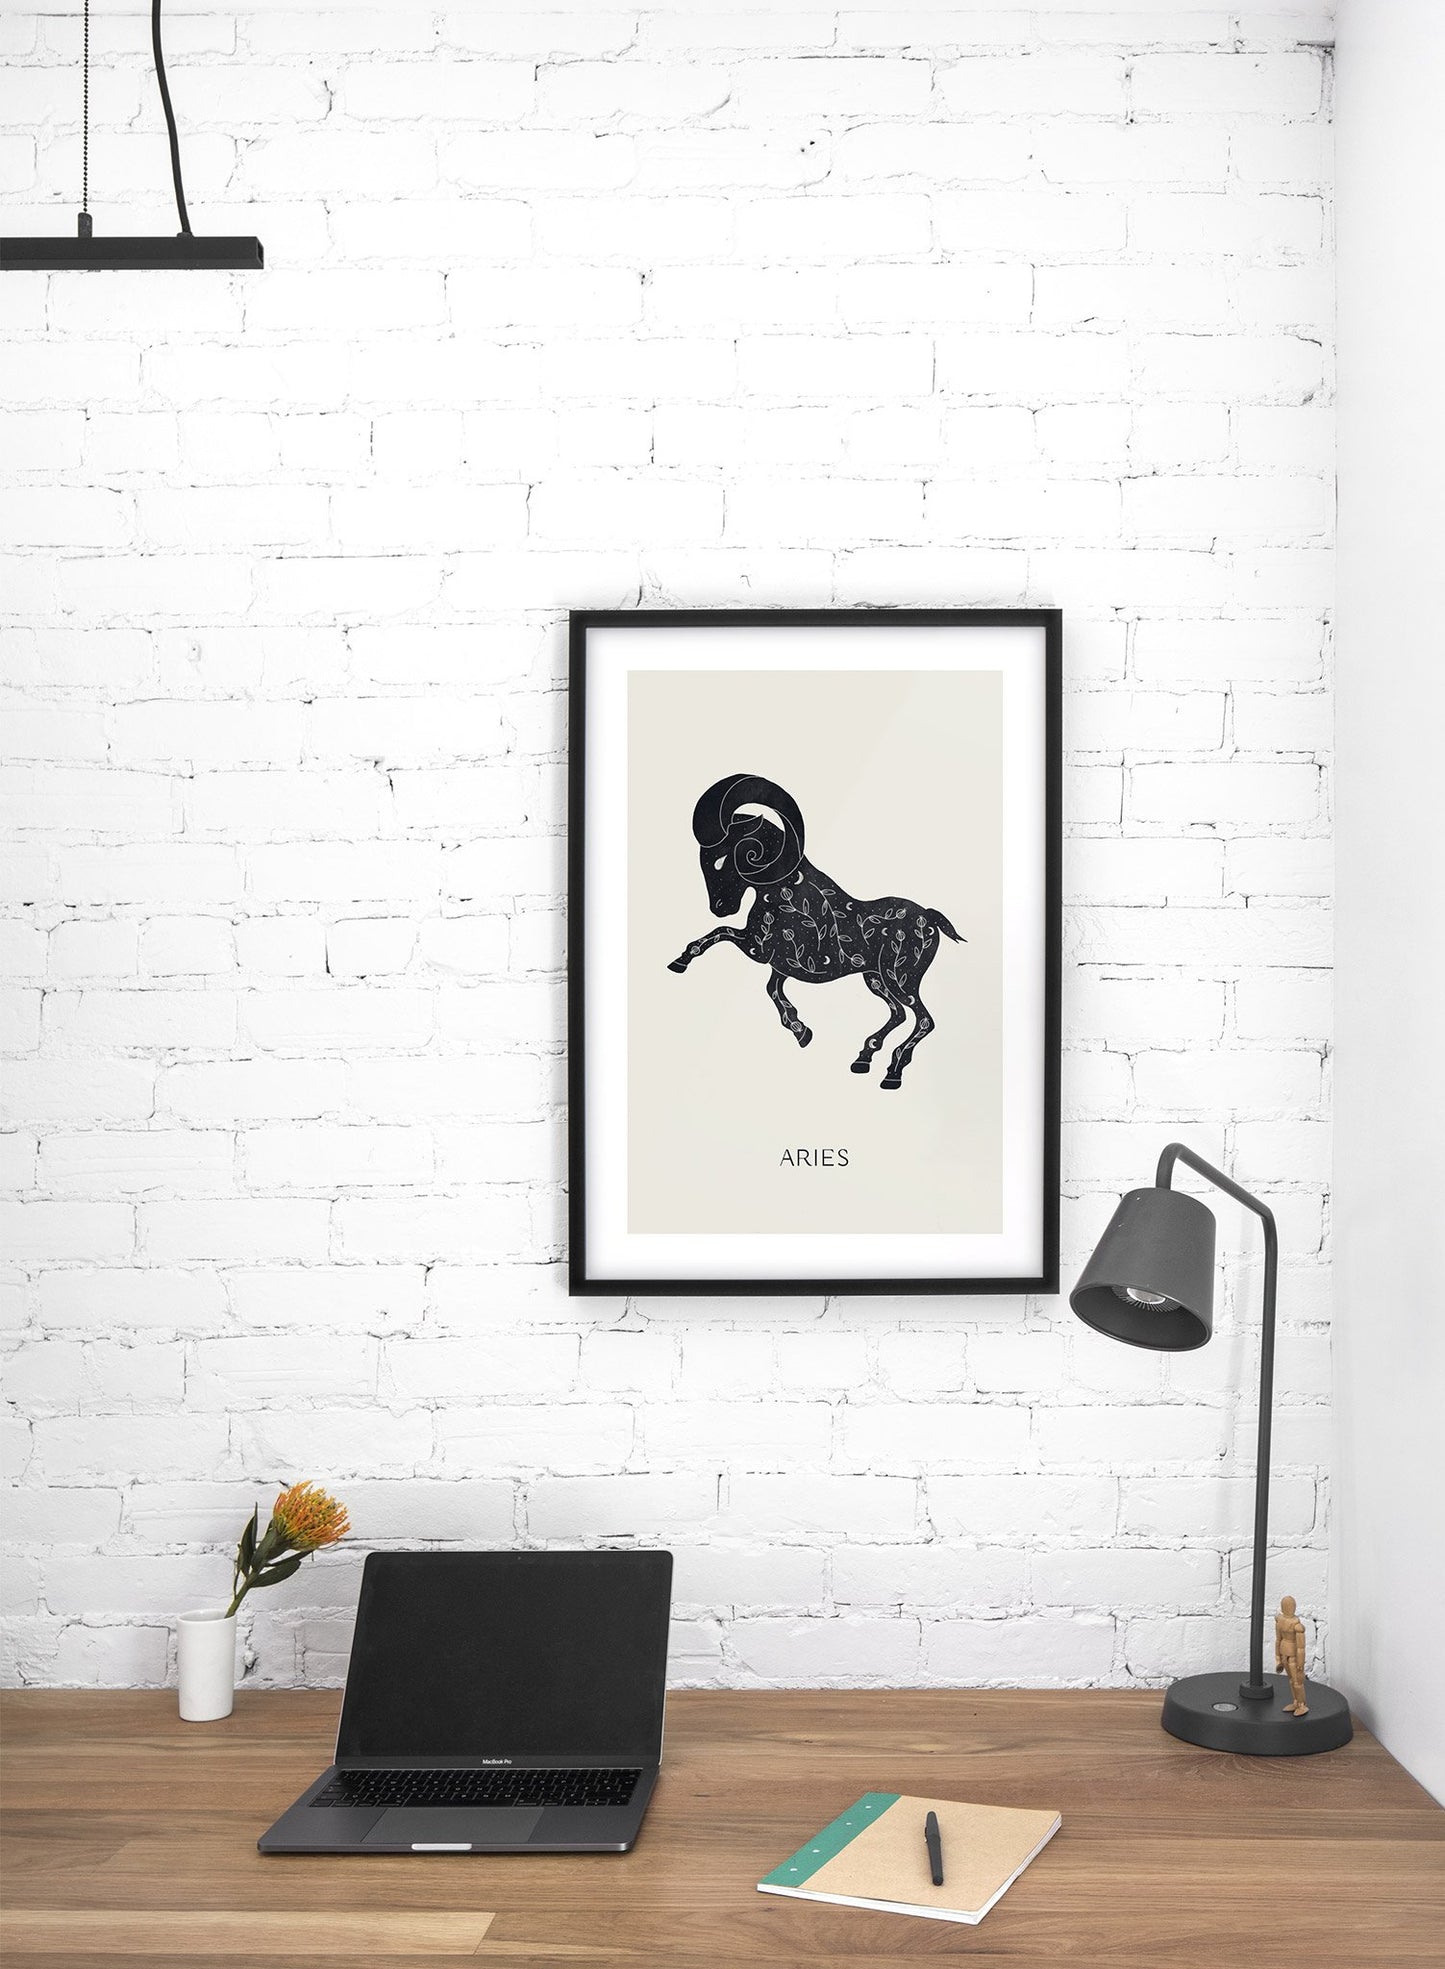 Celestial illustration poster by Opposite Wall with horoscope zodiac symbol of Aries - Lifestyle - Office Desk